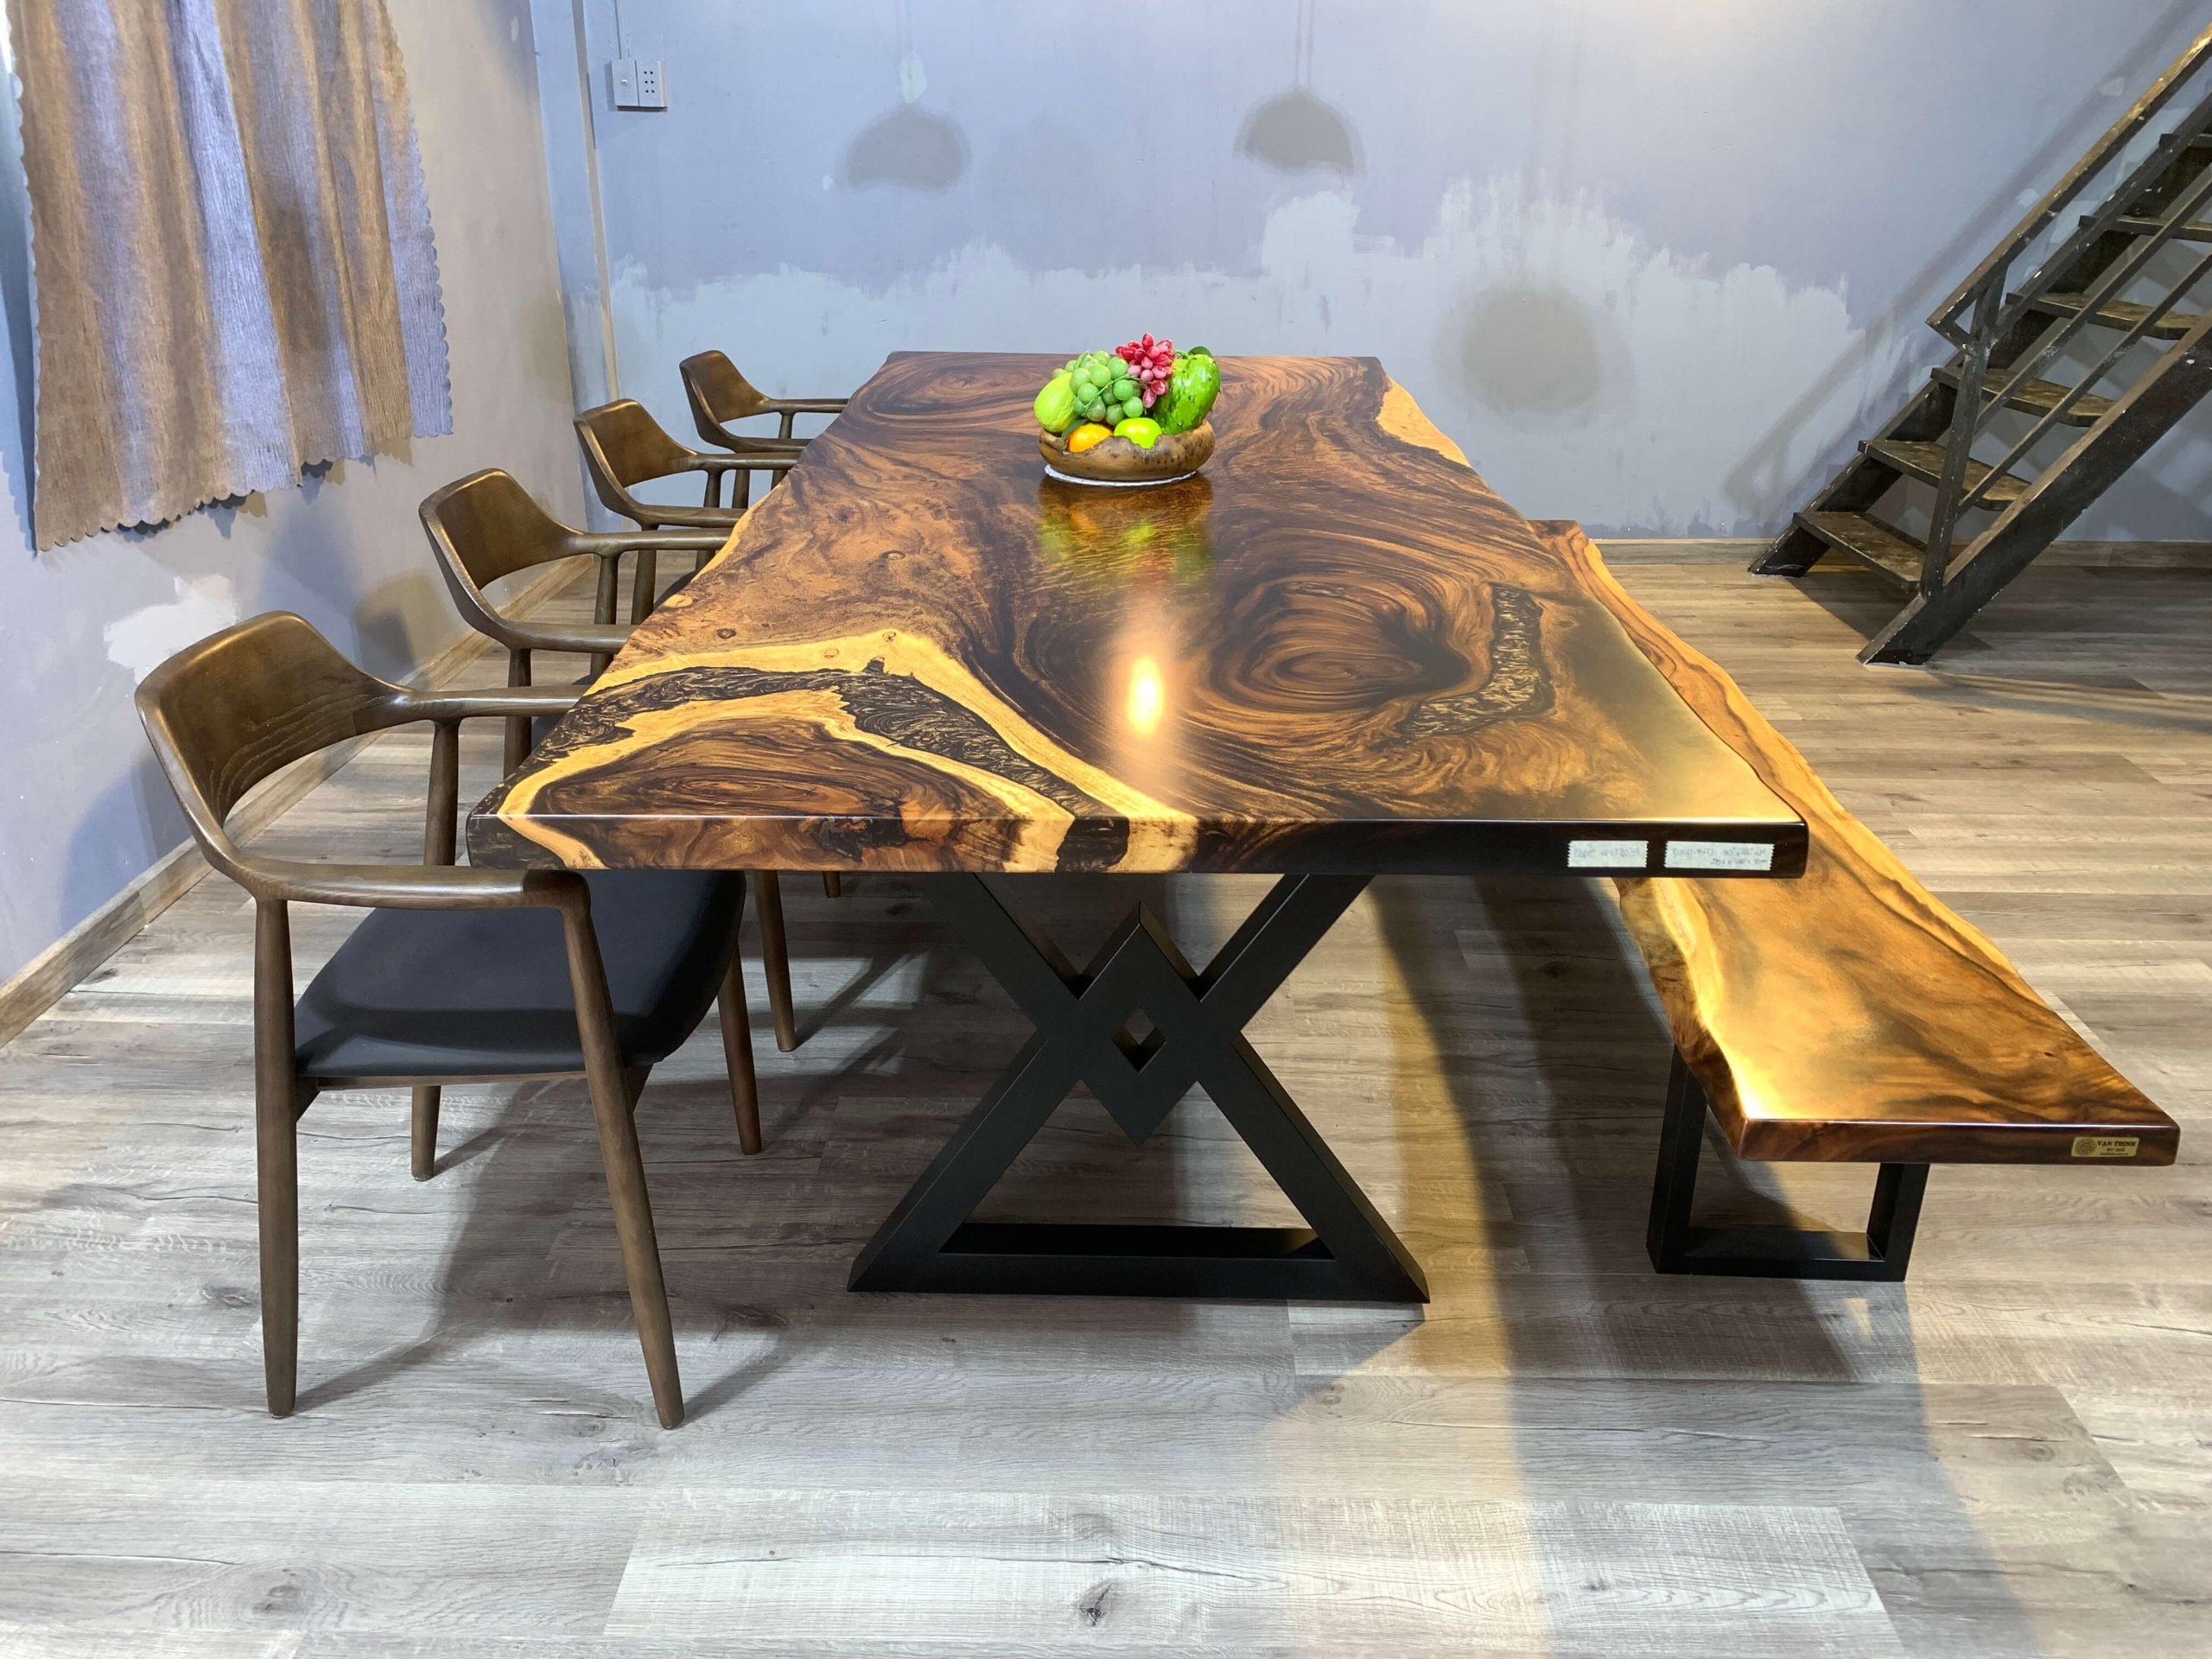 

        
EUROPEAN FURNITURE Africa Dining Table WVT0039-110-T Dining Table Wood/Black  54393986986979
